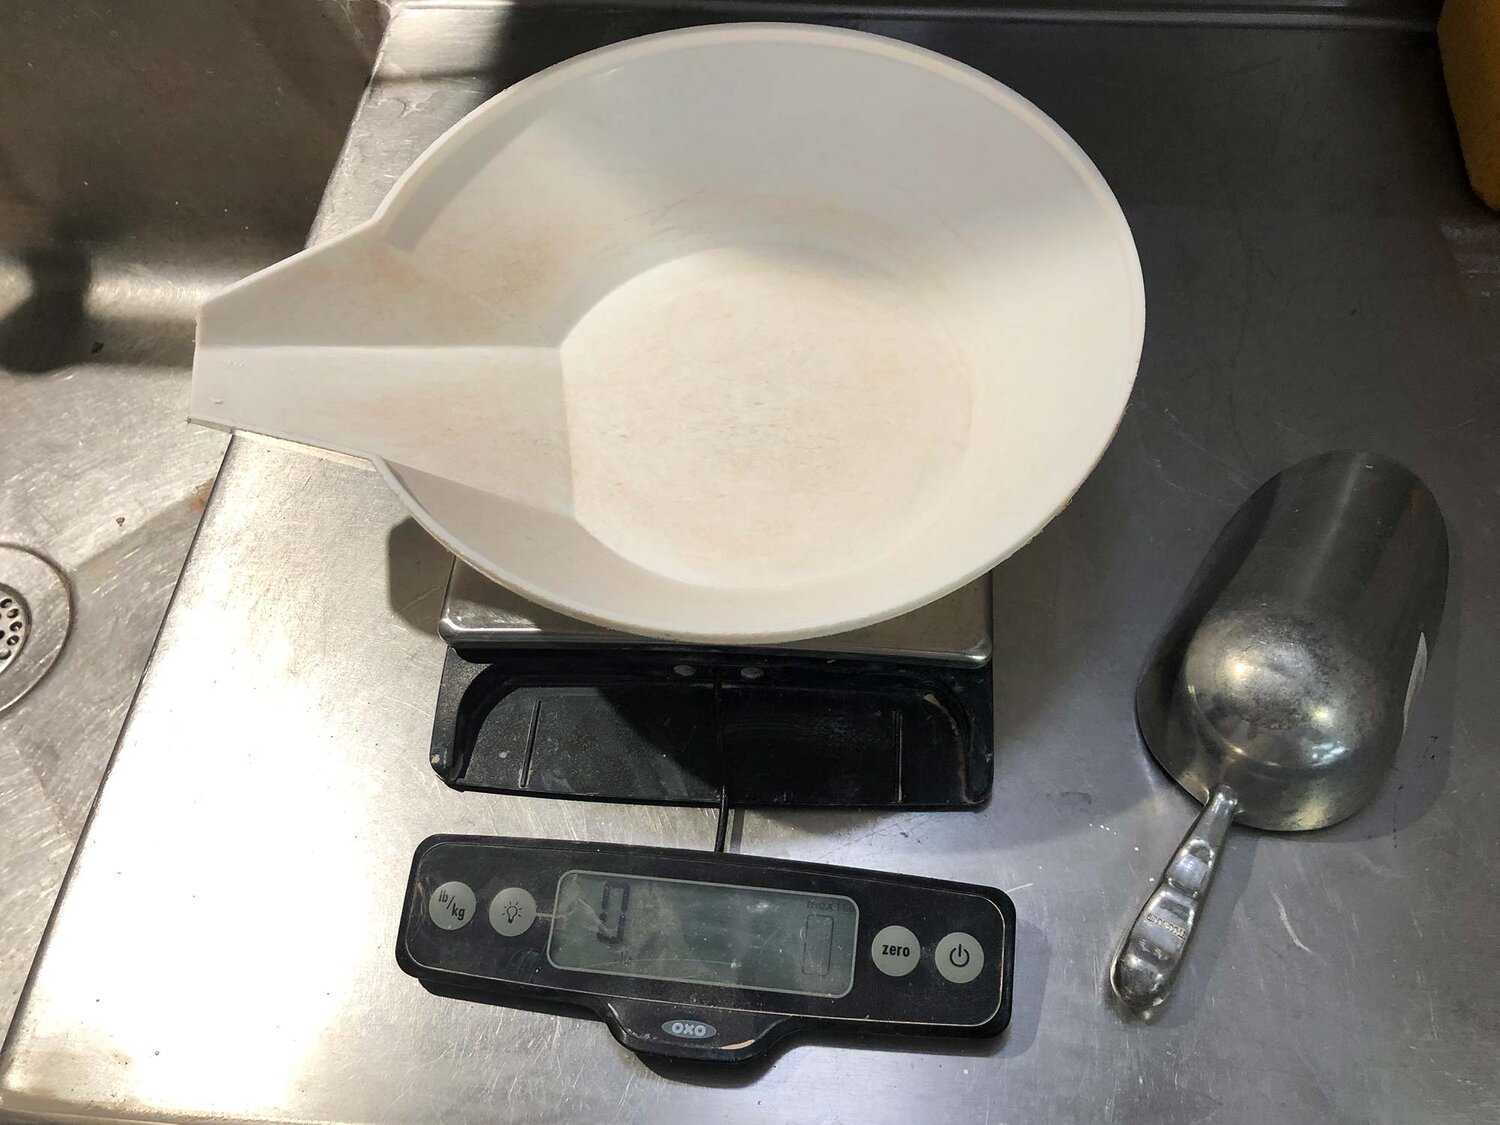 The Best Digital Scales For A Pottery Studio - Pottery Crafters